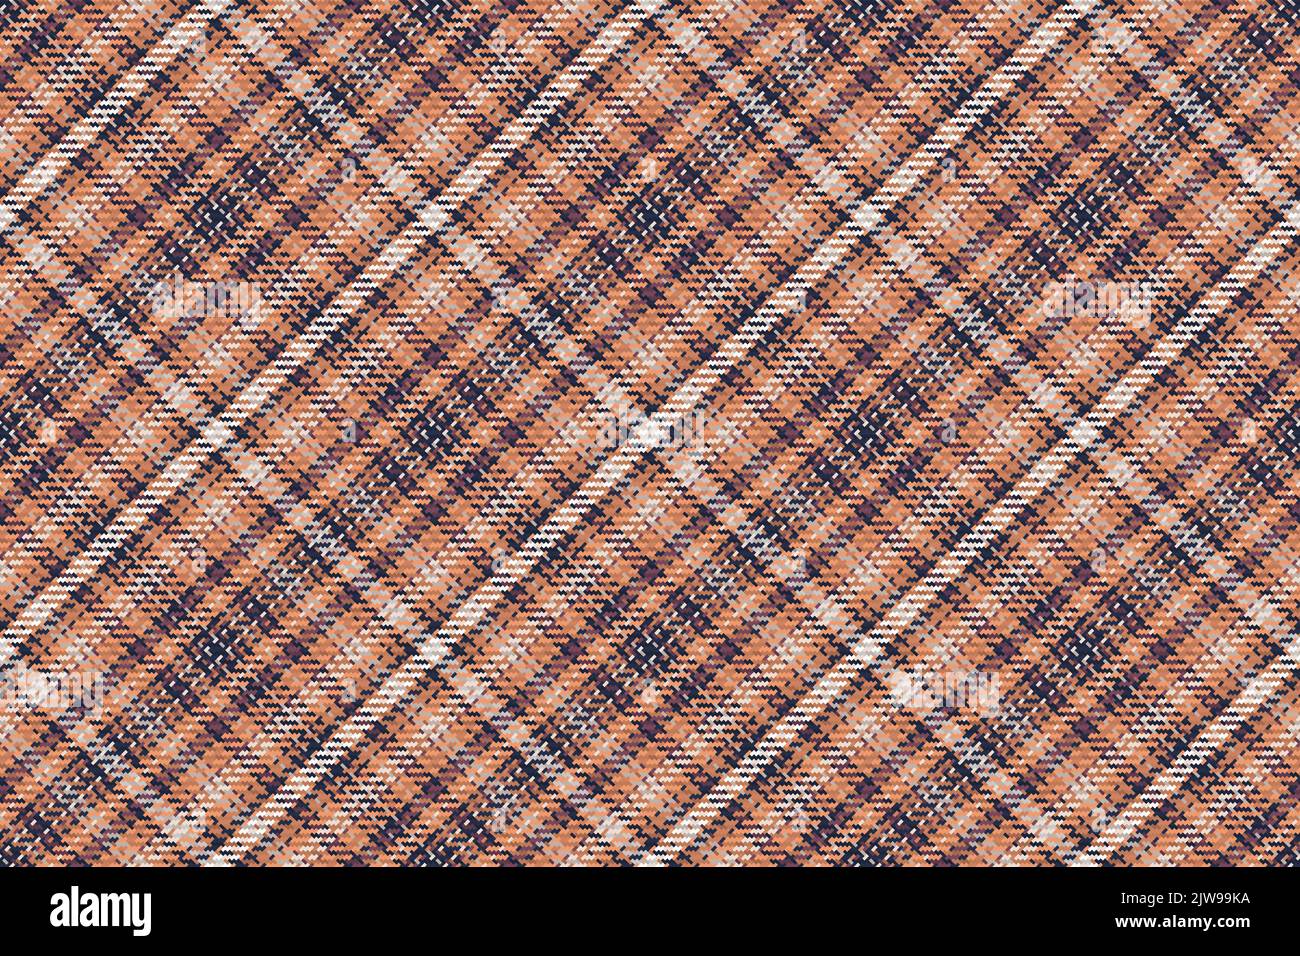 Plaid checkered tartan seamless pattern suitable for fashion textiles and graphics design. Stock Vector